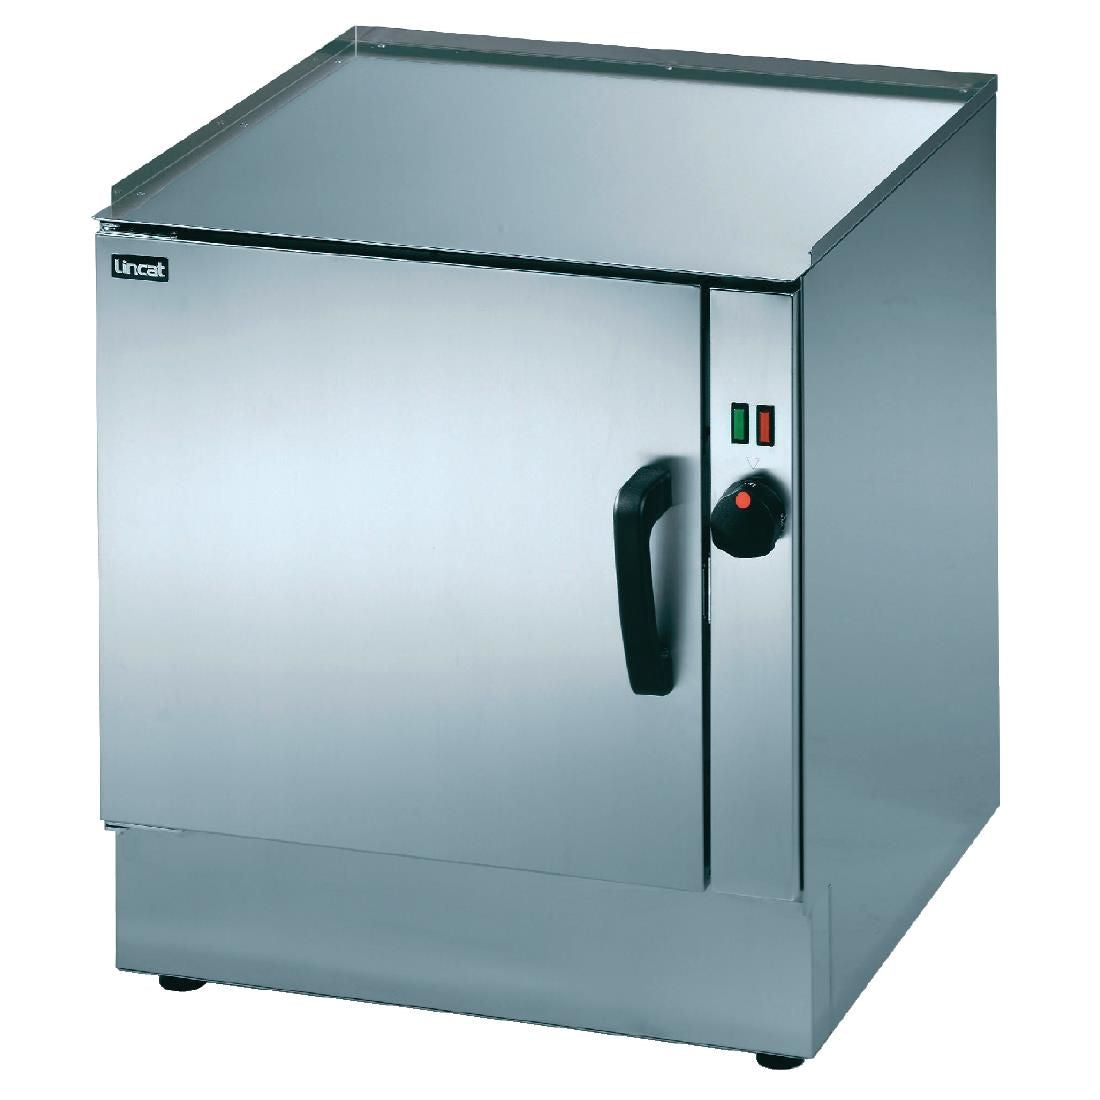 V6 - Lincat Silverlink 600 Electric Free-standing Oven - W 600 mm - 3.0 kW E541